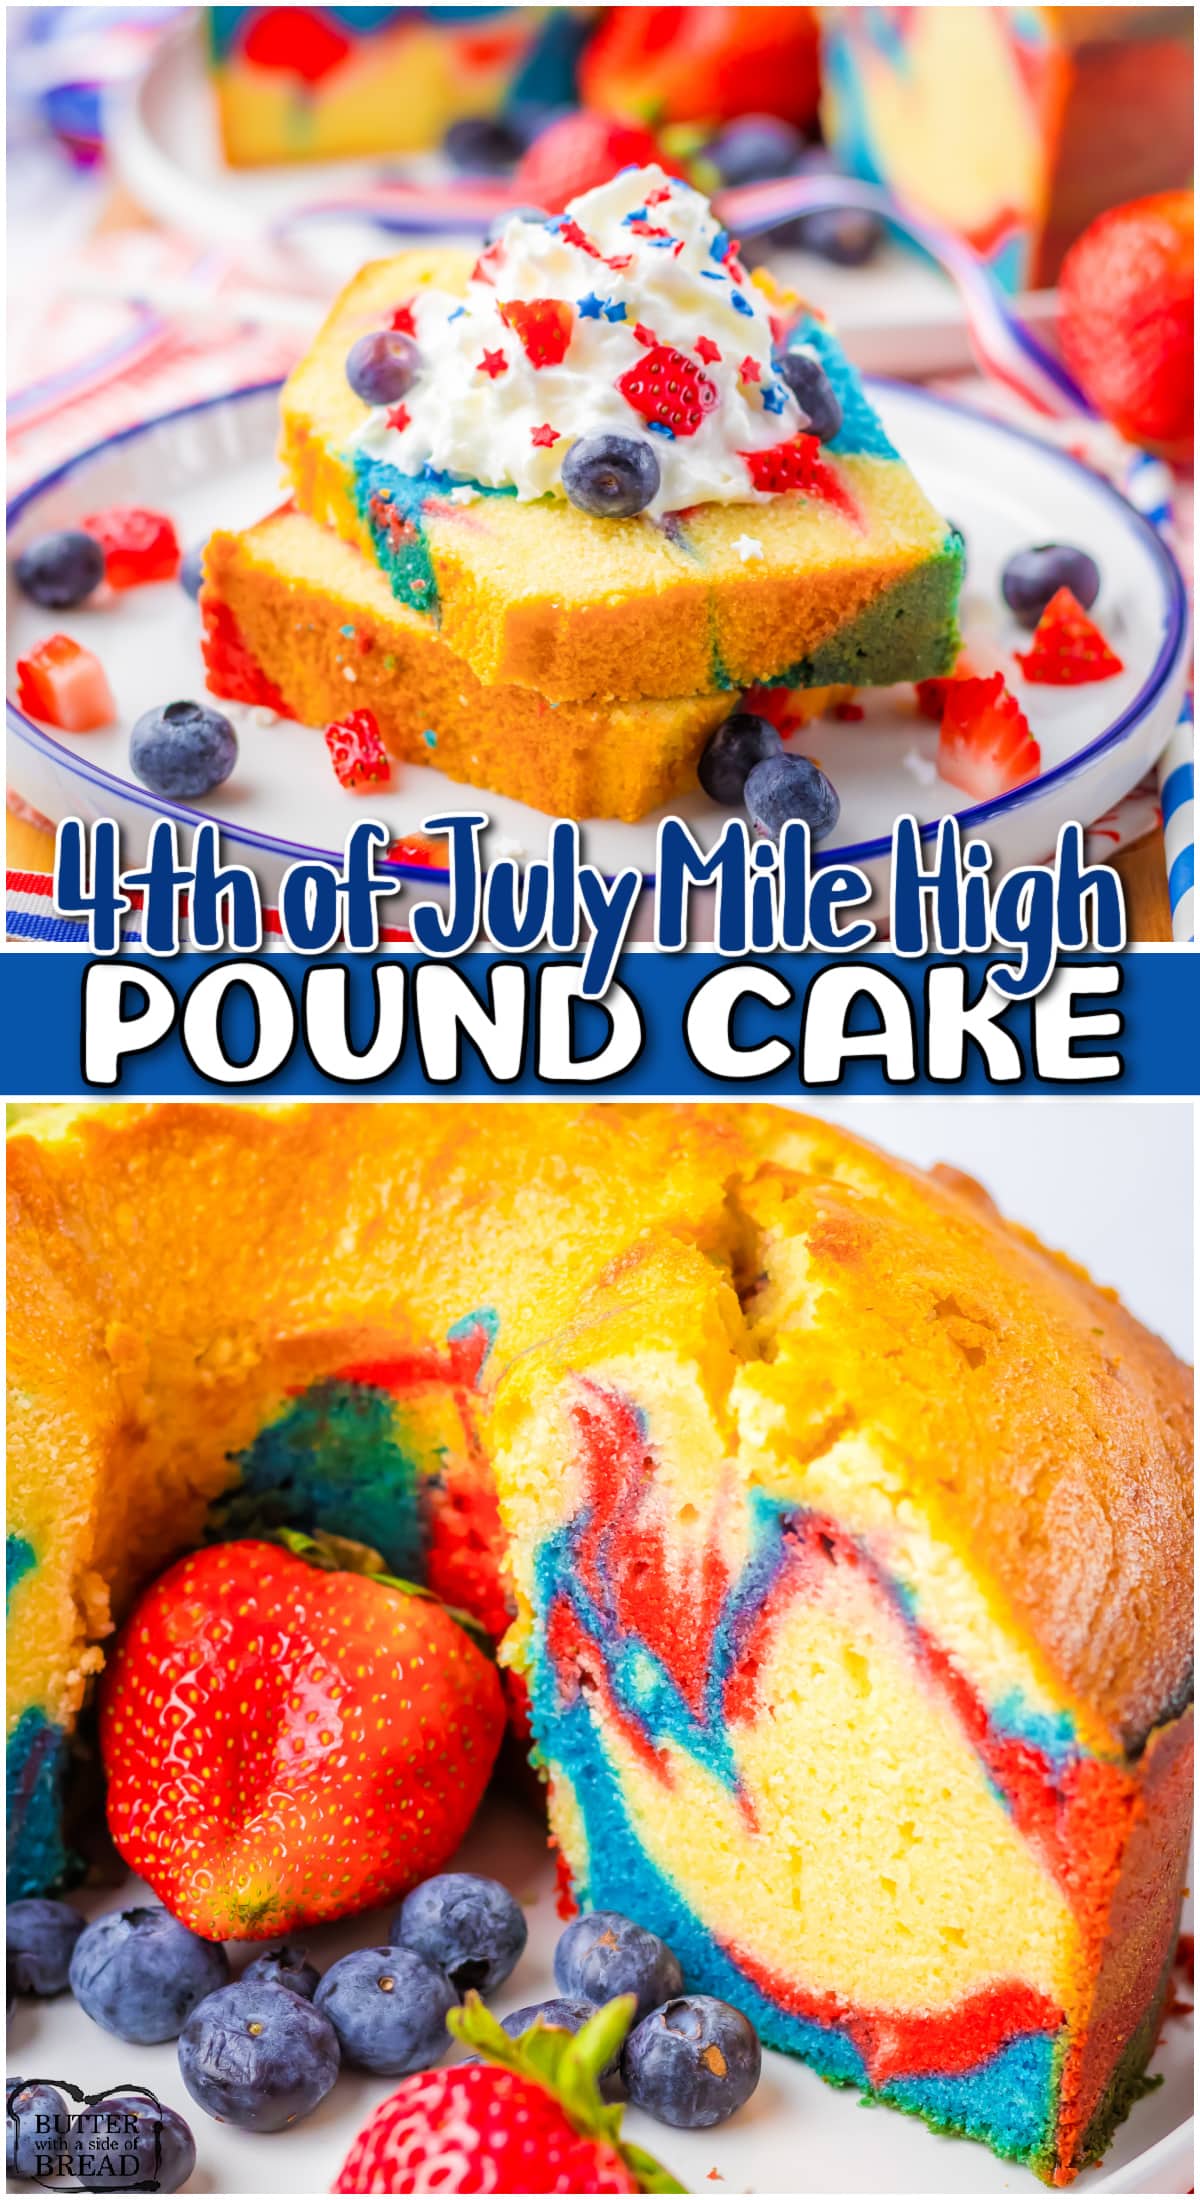 Festive 4th of July Old Fashioned Pound Cake has fantastic flavor & a fabulous red, white & blue swirl!  Topped with whipped cream, fruit and sprinkles this will be the hit of any 4th of July party!